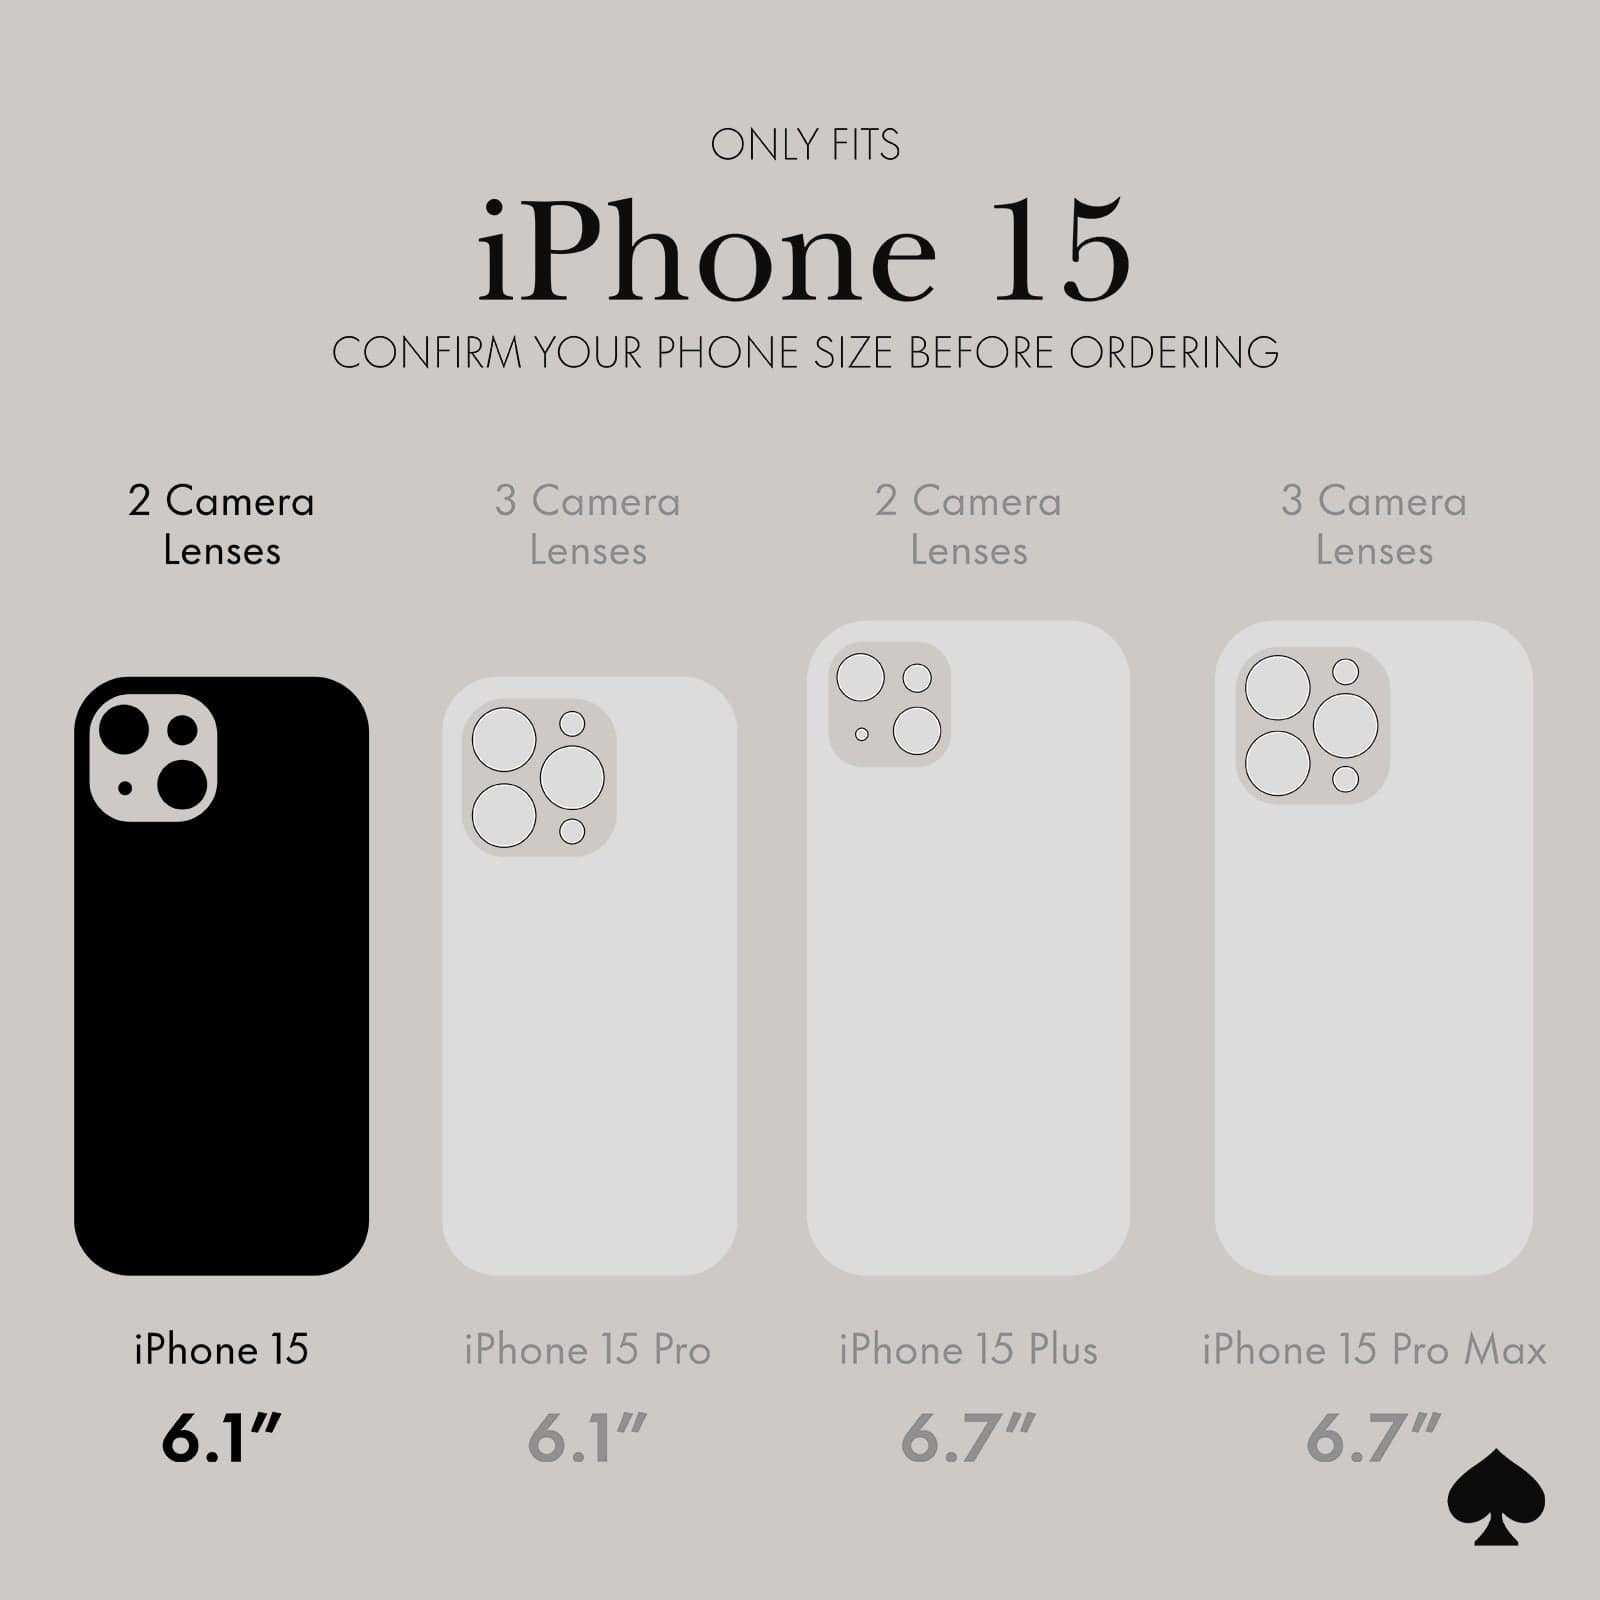 ONLY FITS IPHONE 15. CONFIRM YOUR PHONE SIZE BEFORE ORDERING